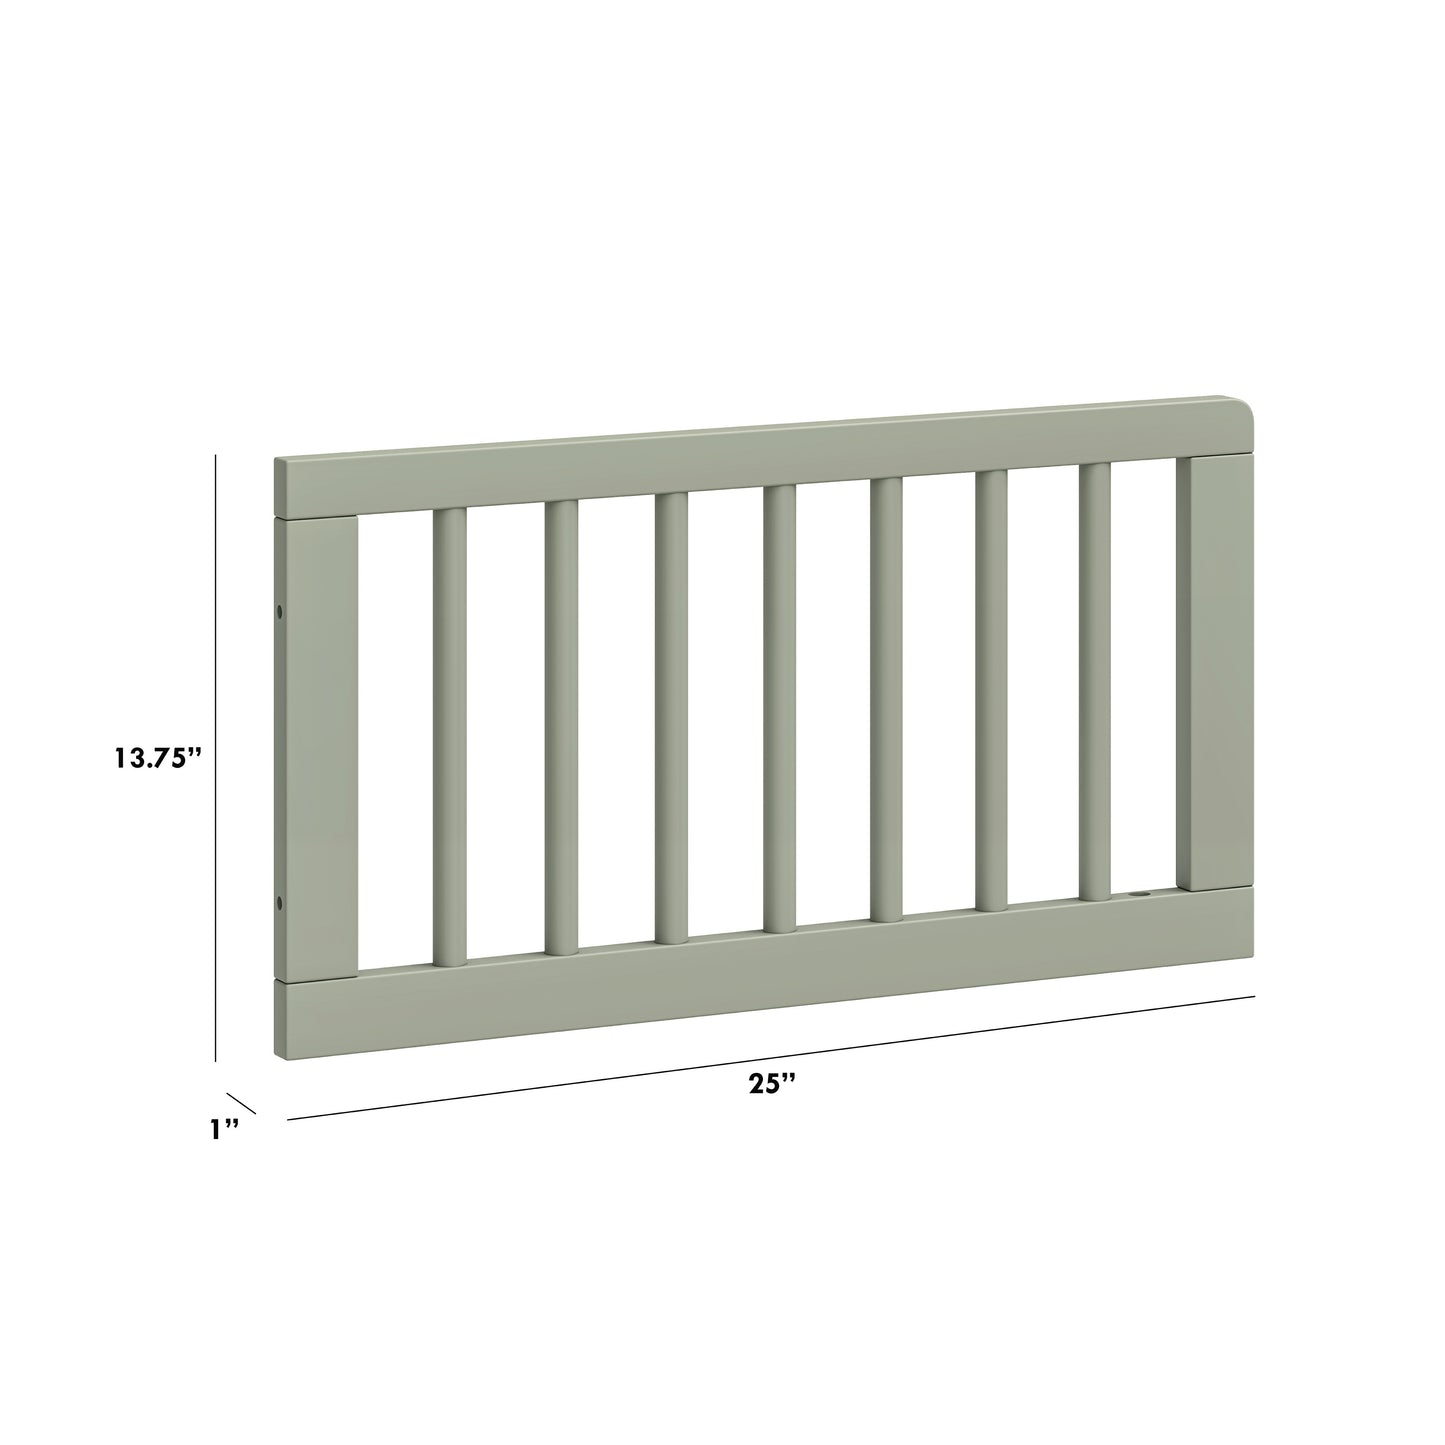 M19699FS,Toddler Bed Conversion Kit in French Sage